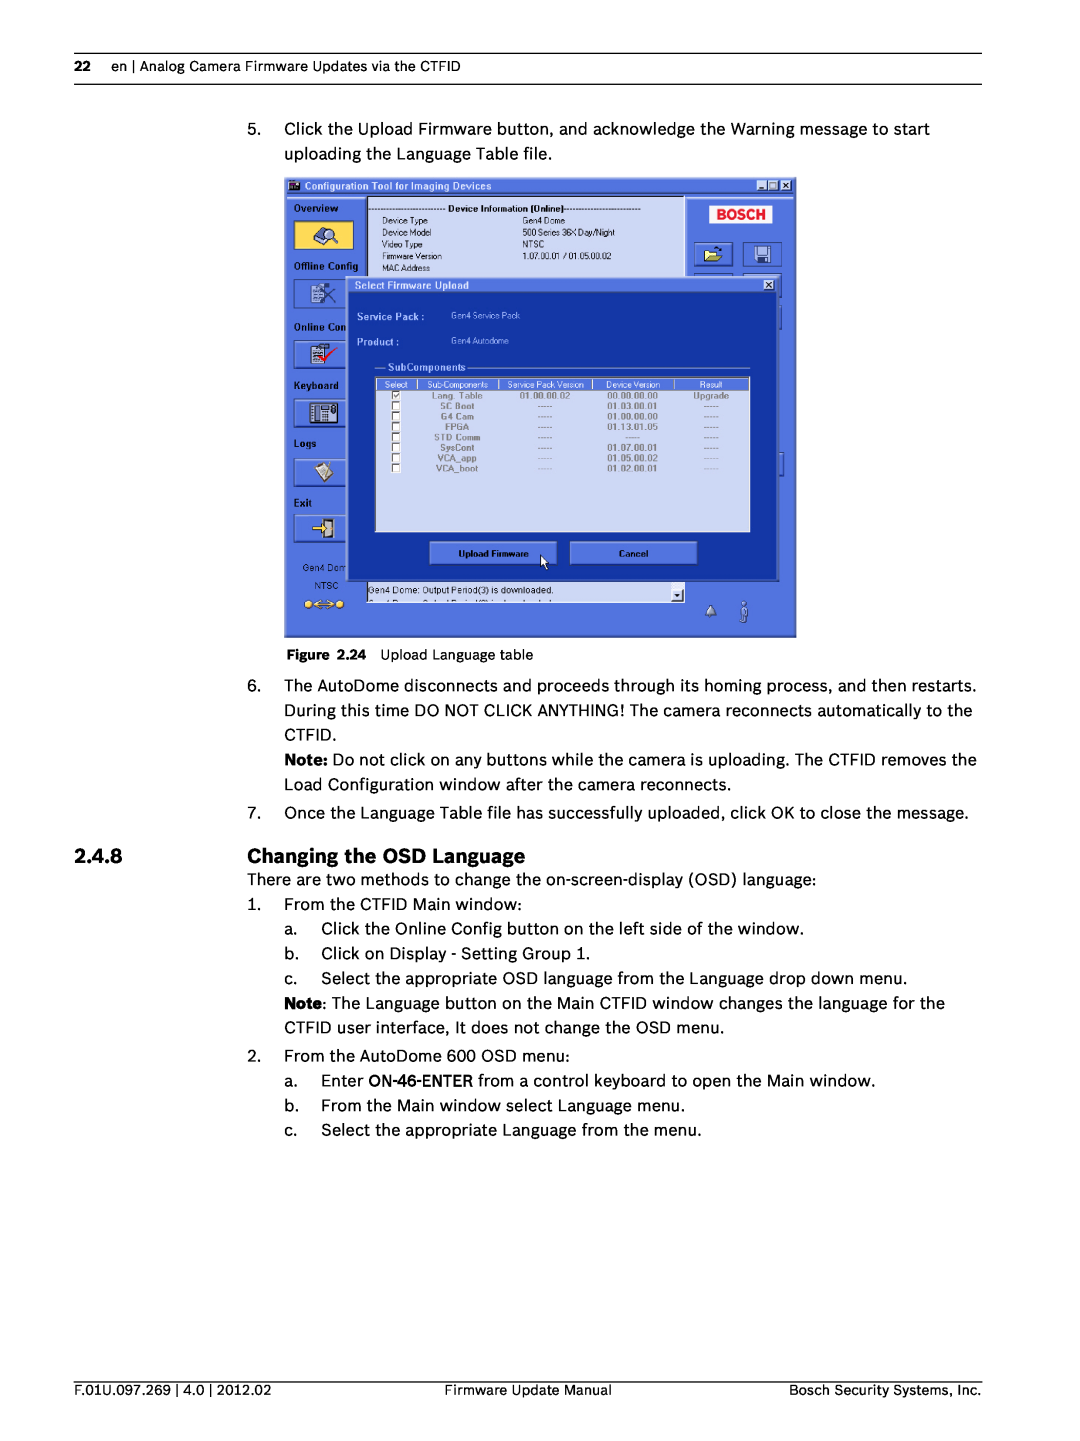 Bosch Appliances 700, 800, 100, 600 user manual 2.4.8, Changing the OSD Language 